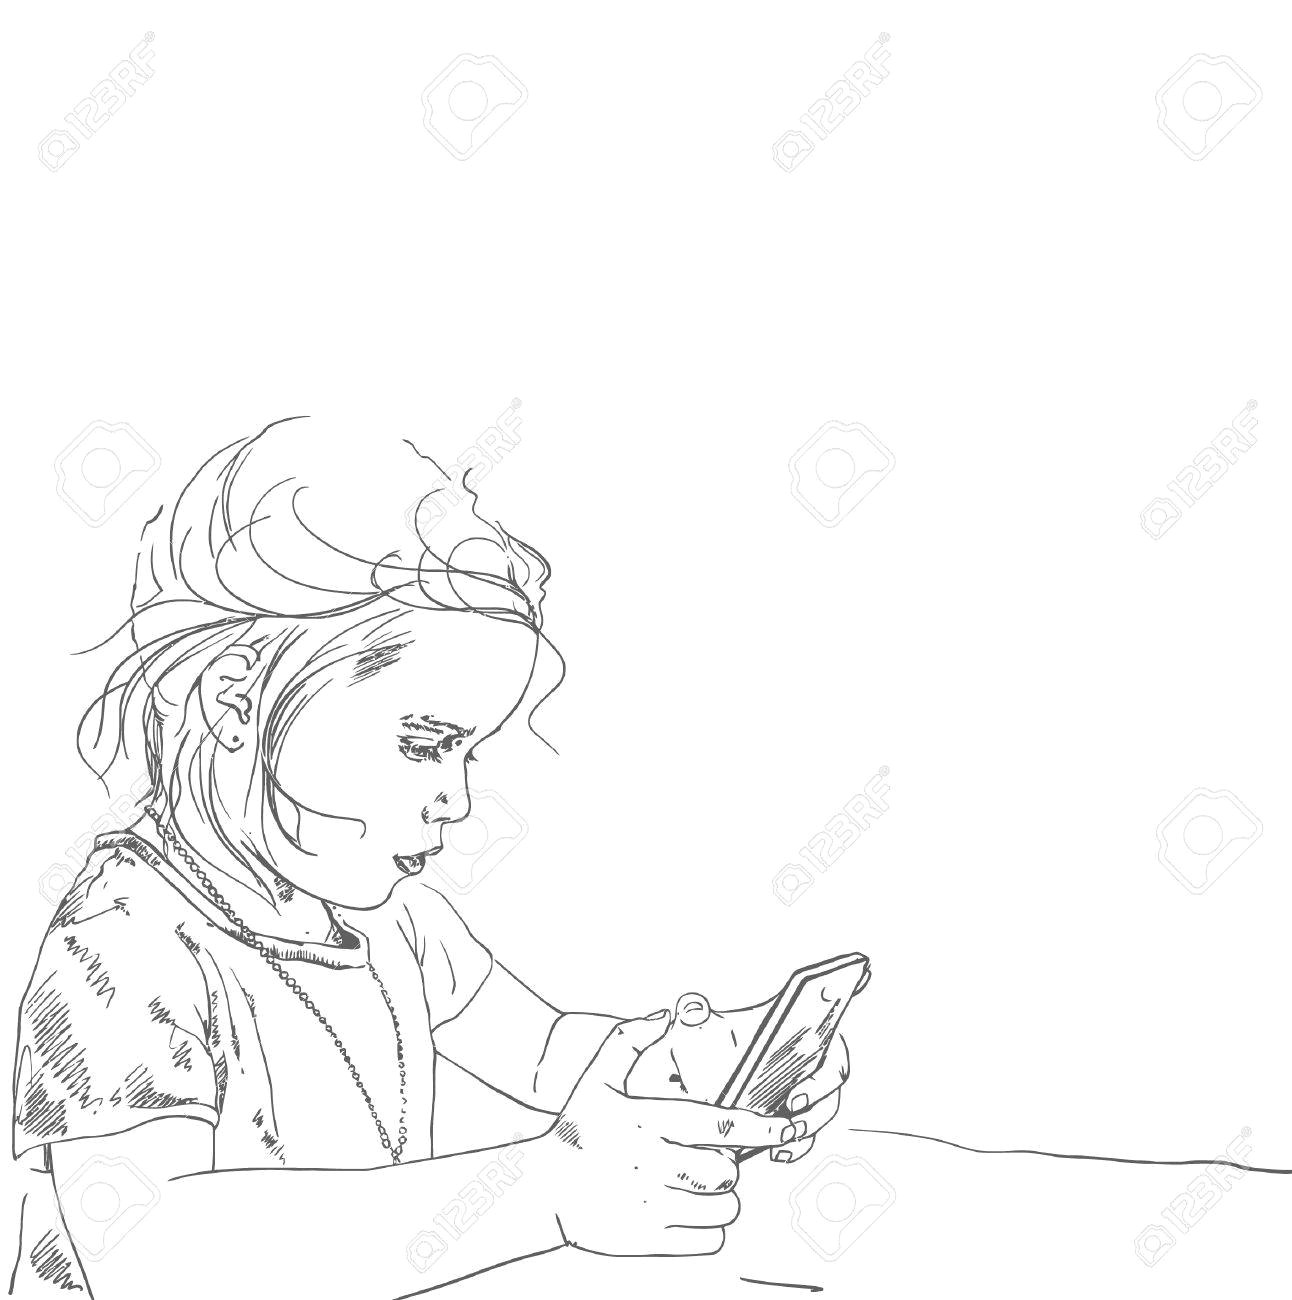 Drawing Of Girl Holding Phone Drawing Illustration Of Little Five Years Old Girl Holding and